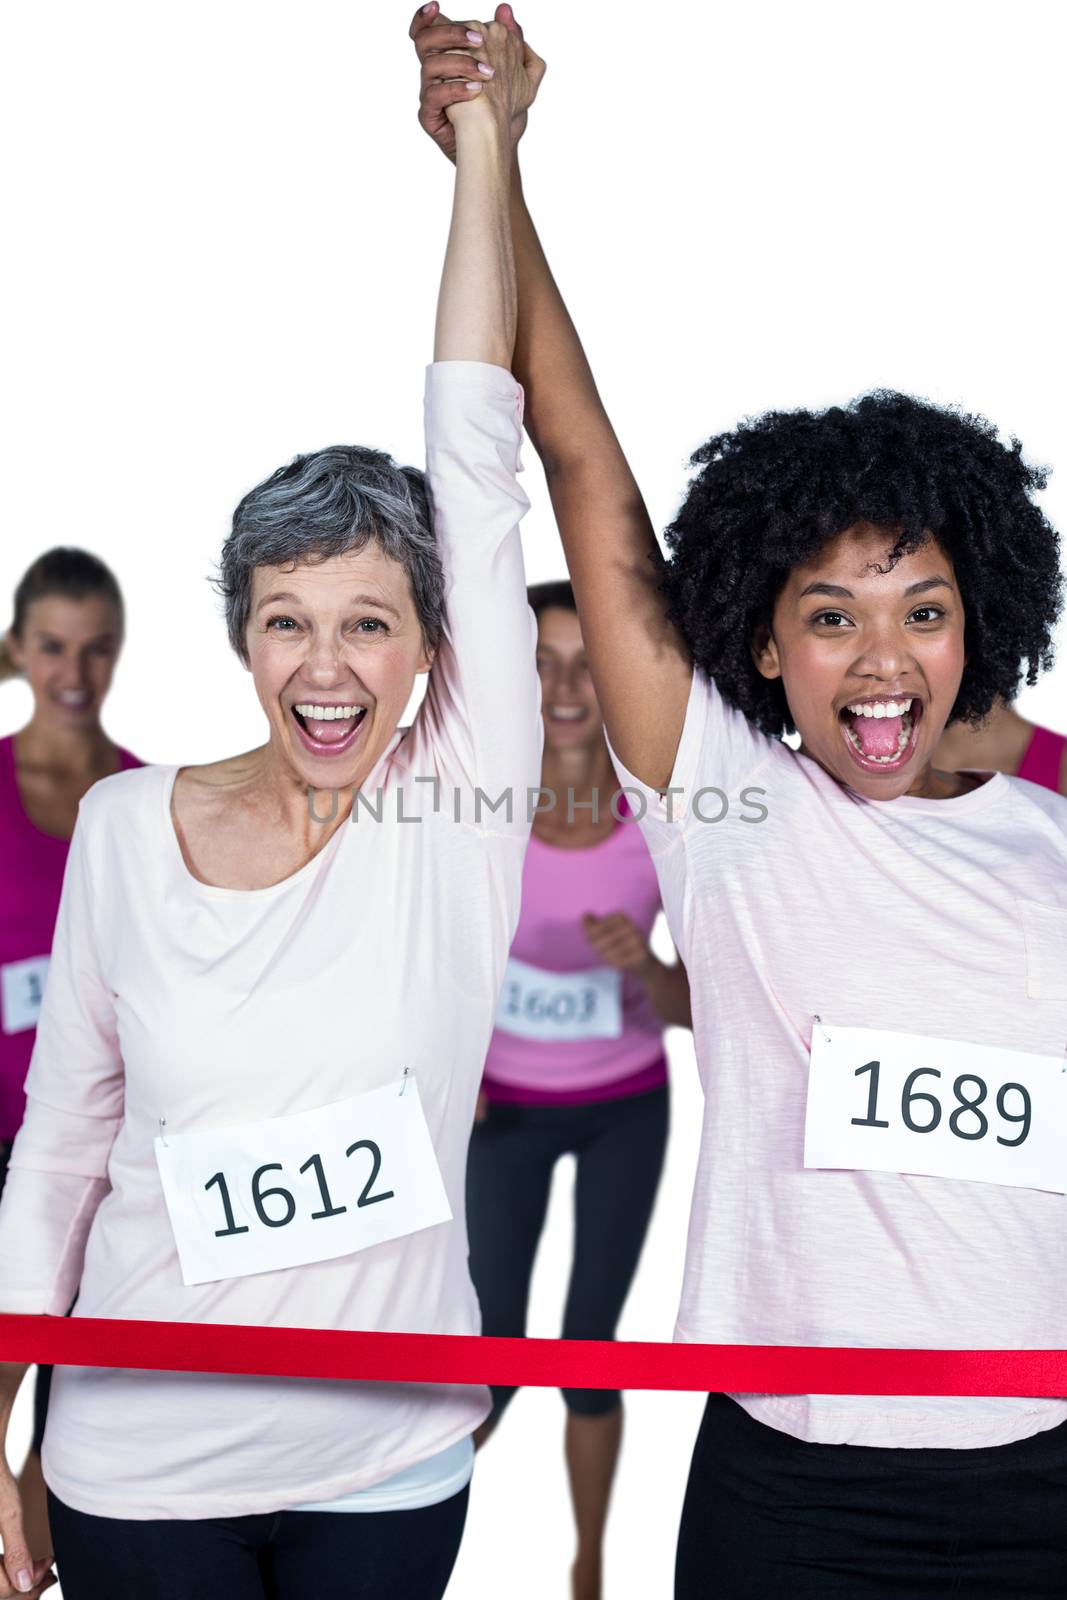 Portrait of smiling winner athletes crossing finish line with arms raised against white background